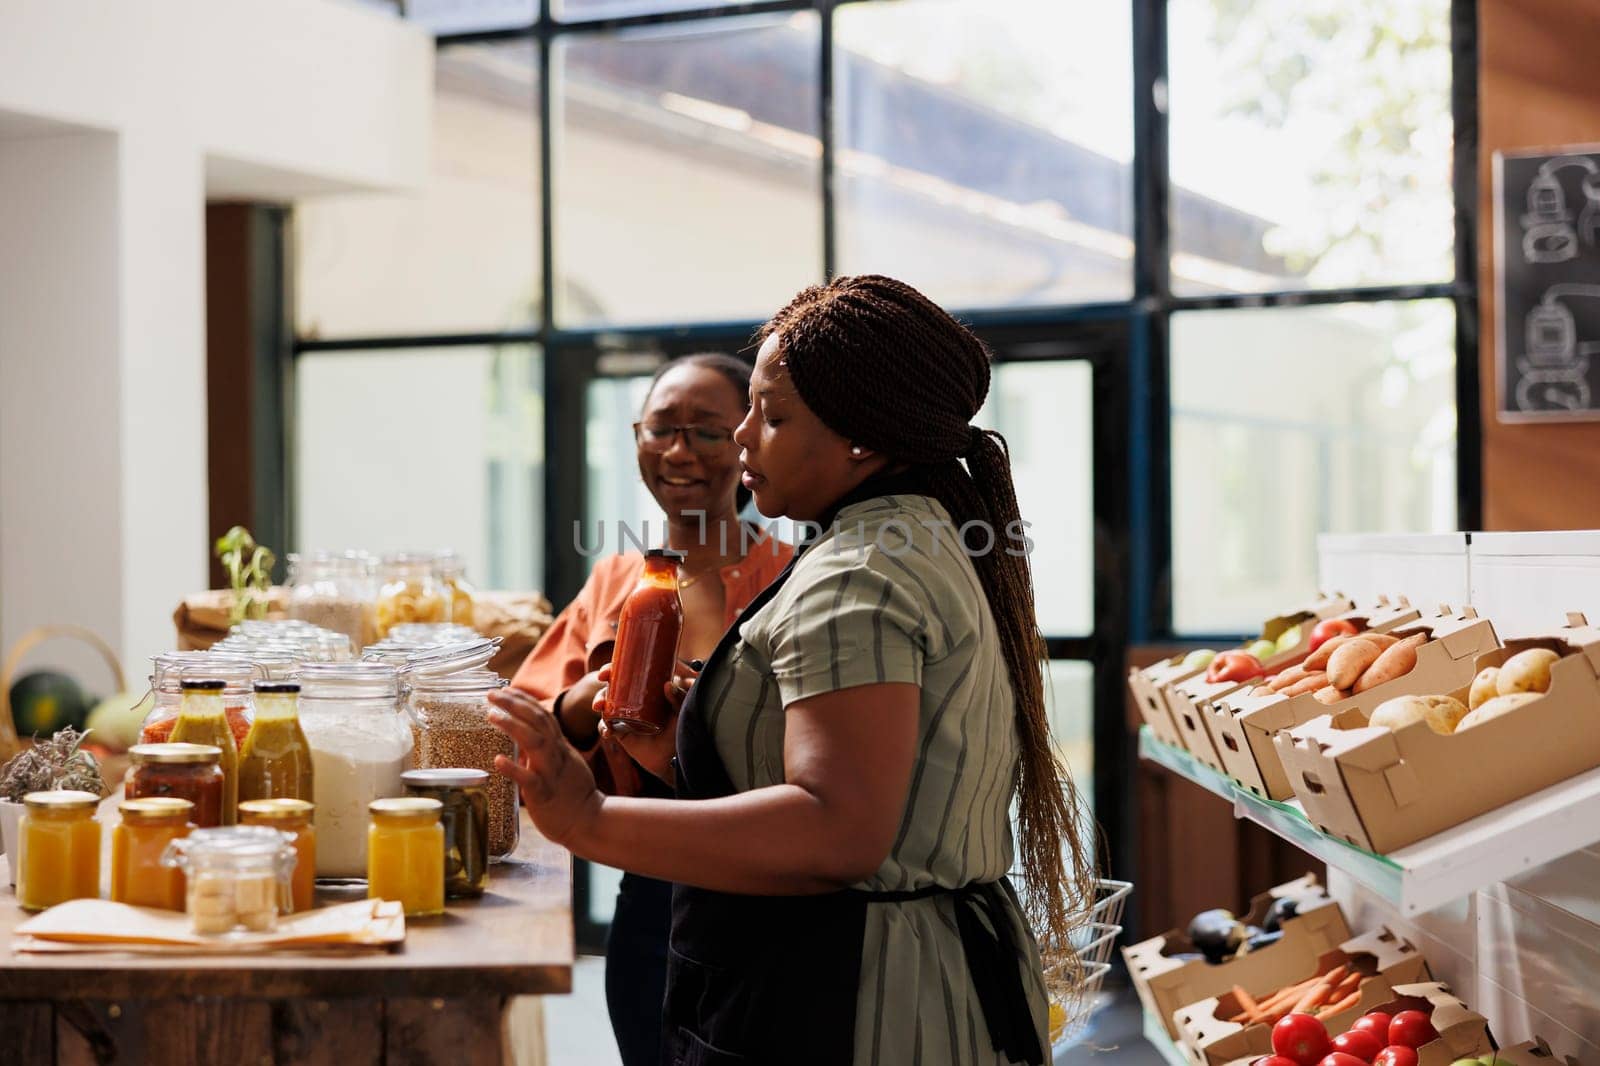 Black woman with spectacles shopping in zero waste store looking for farm grown bulk products. Customer purchasing pantry staples from local grocery shop with assistance from female vendor.